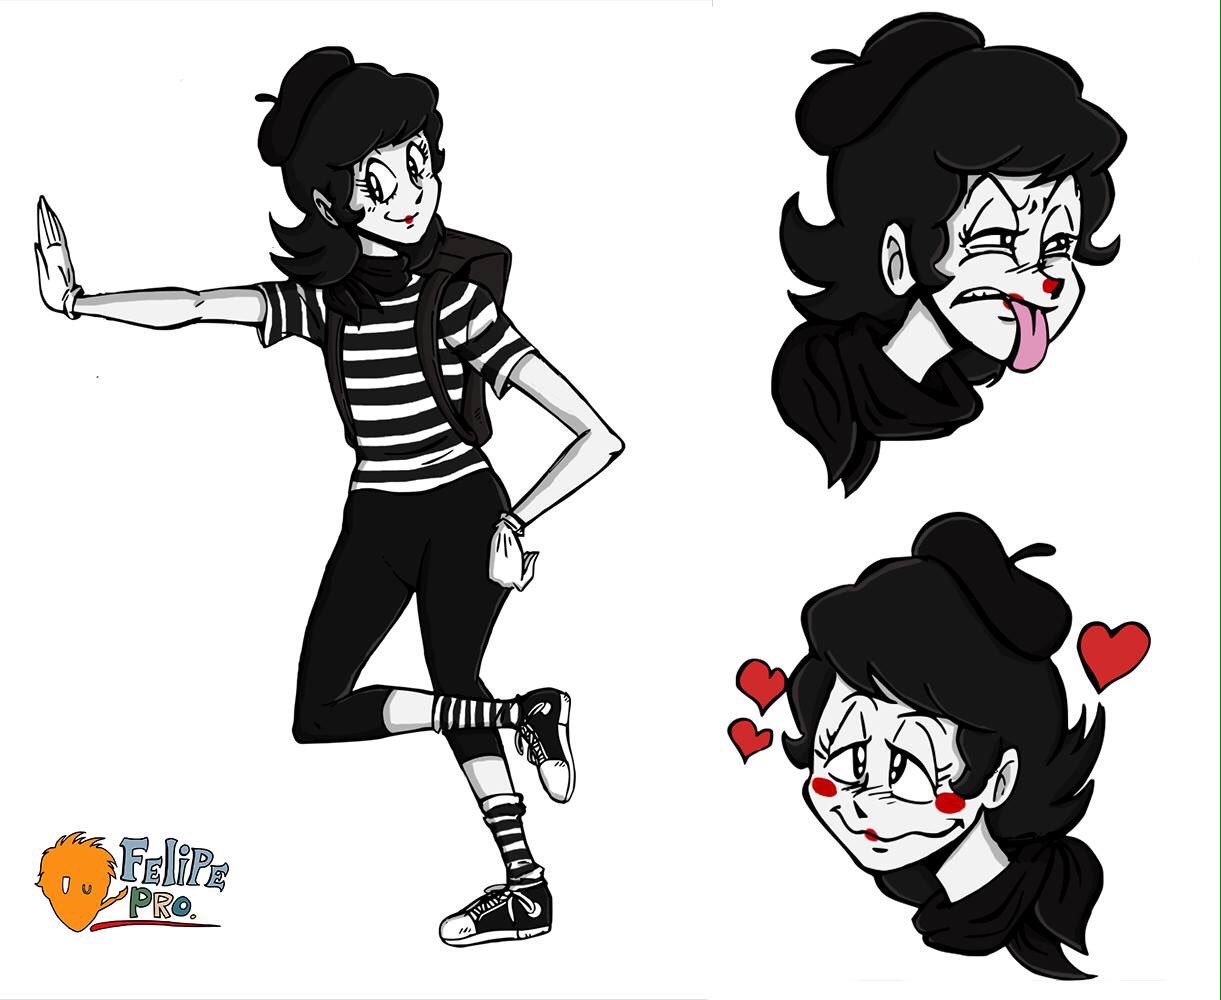 Felipe Q on X: Here's a commission to my old friend Godines Franco. It's a  original characters of his! She's a real mime. Like, for real, her  pantomimes become reality. Her make-up